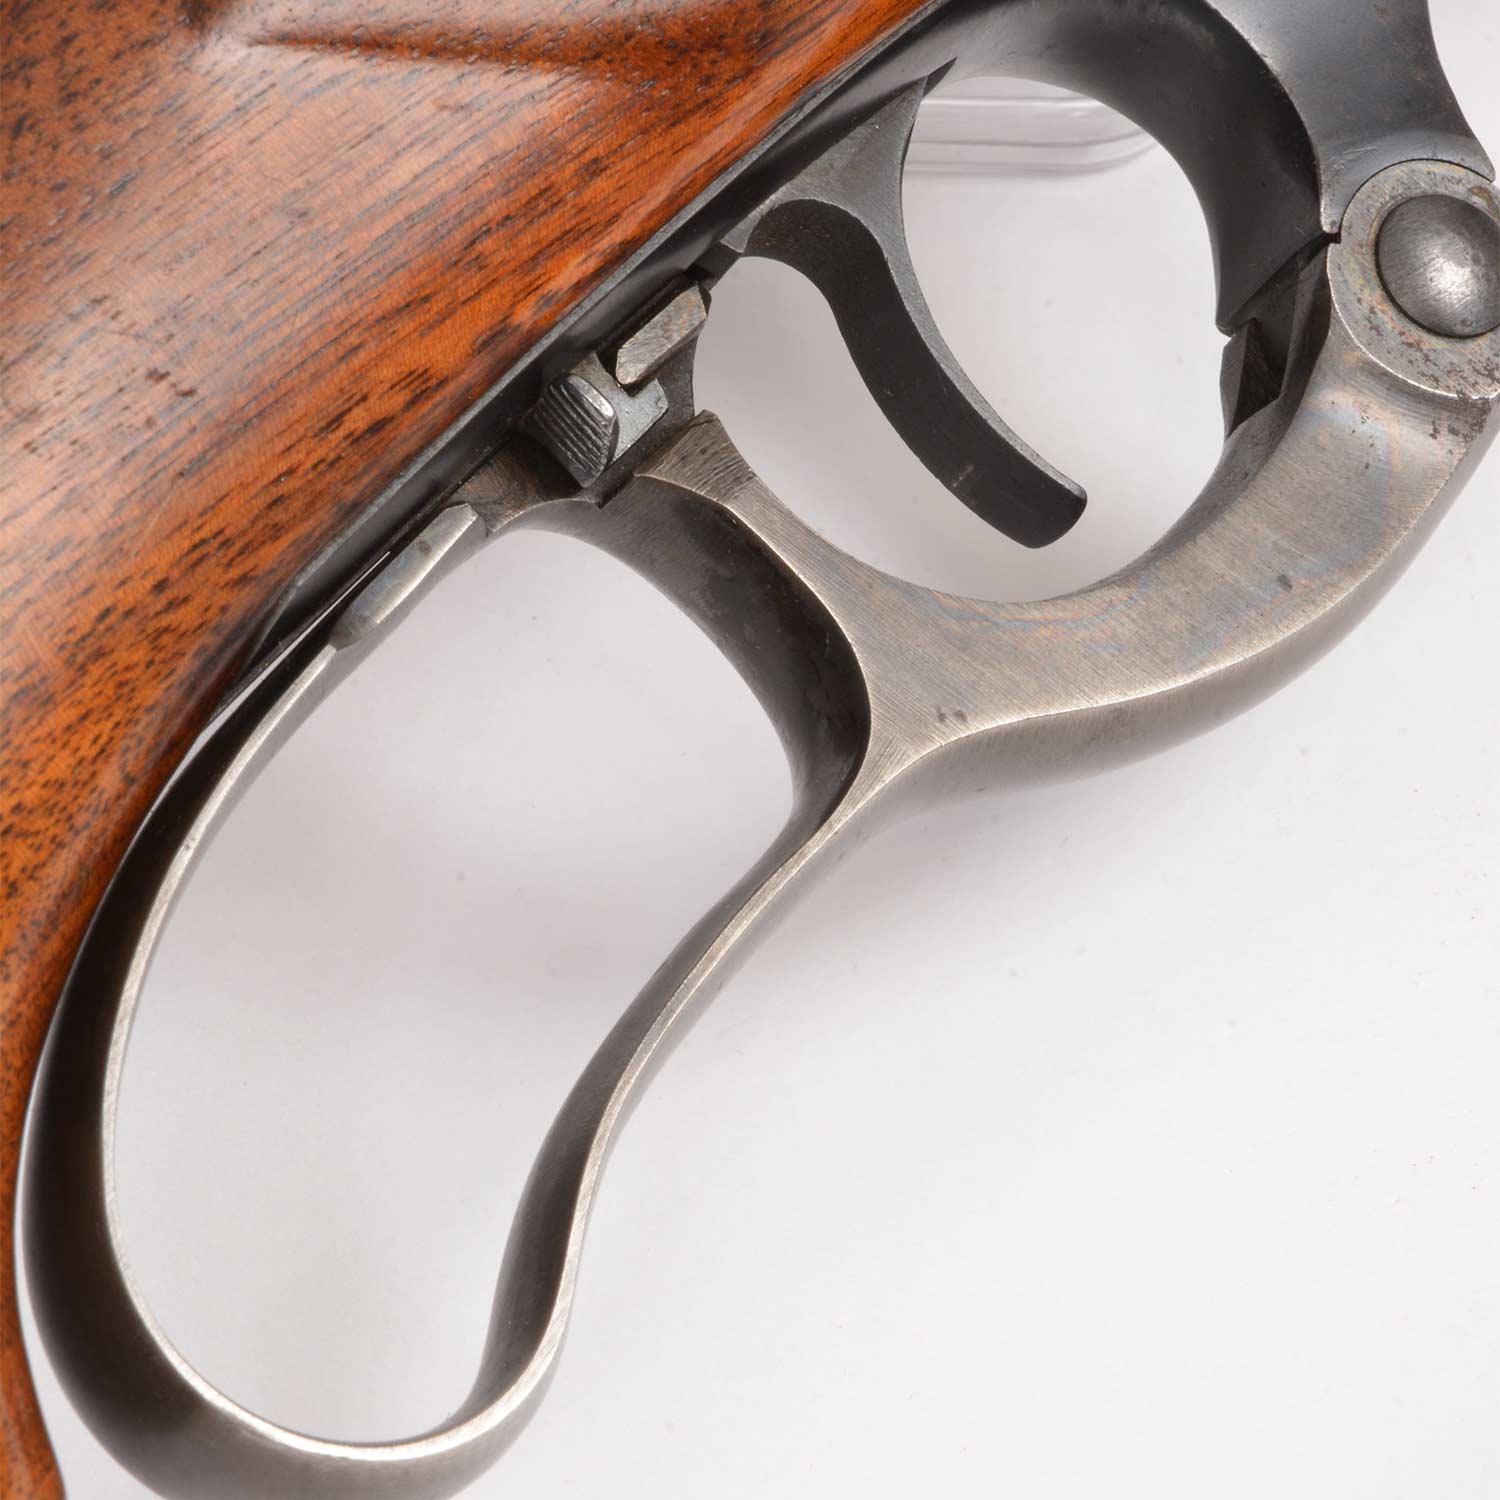 The lever, trigger, and safety detail of the Savage Model 99 lever action rifle.